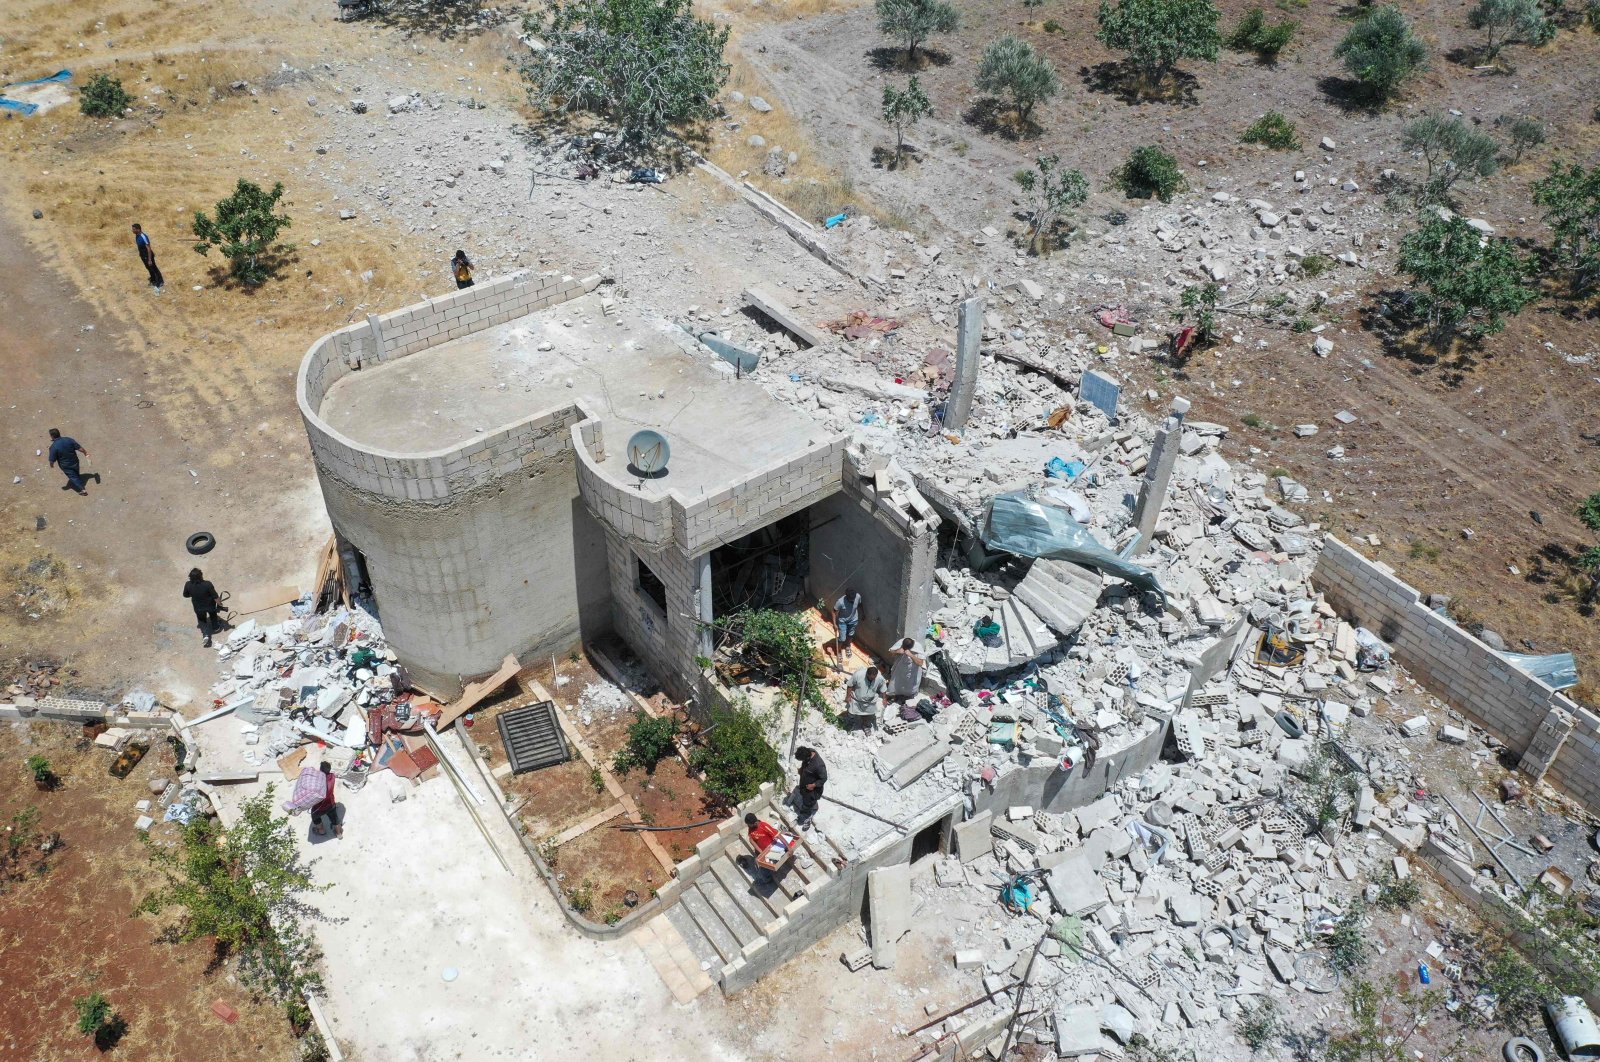 An aerial picture shows people salvaging items from the rubble of a damaged house following reported regime shelling in Jabal al-Zawiya's Balyun village, in the south of Syria's last major opposition stronghold of Idlib in the country's northwest, July 3, 2021. (AFP Photo)